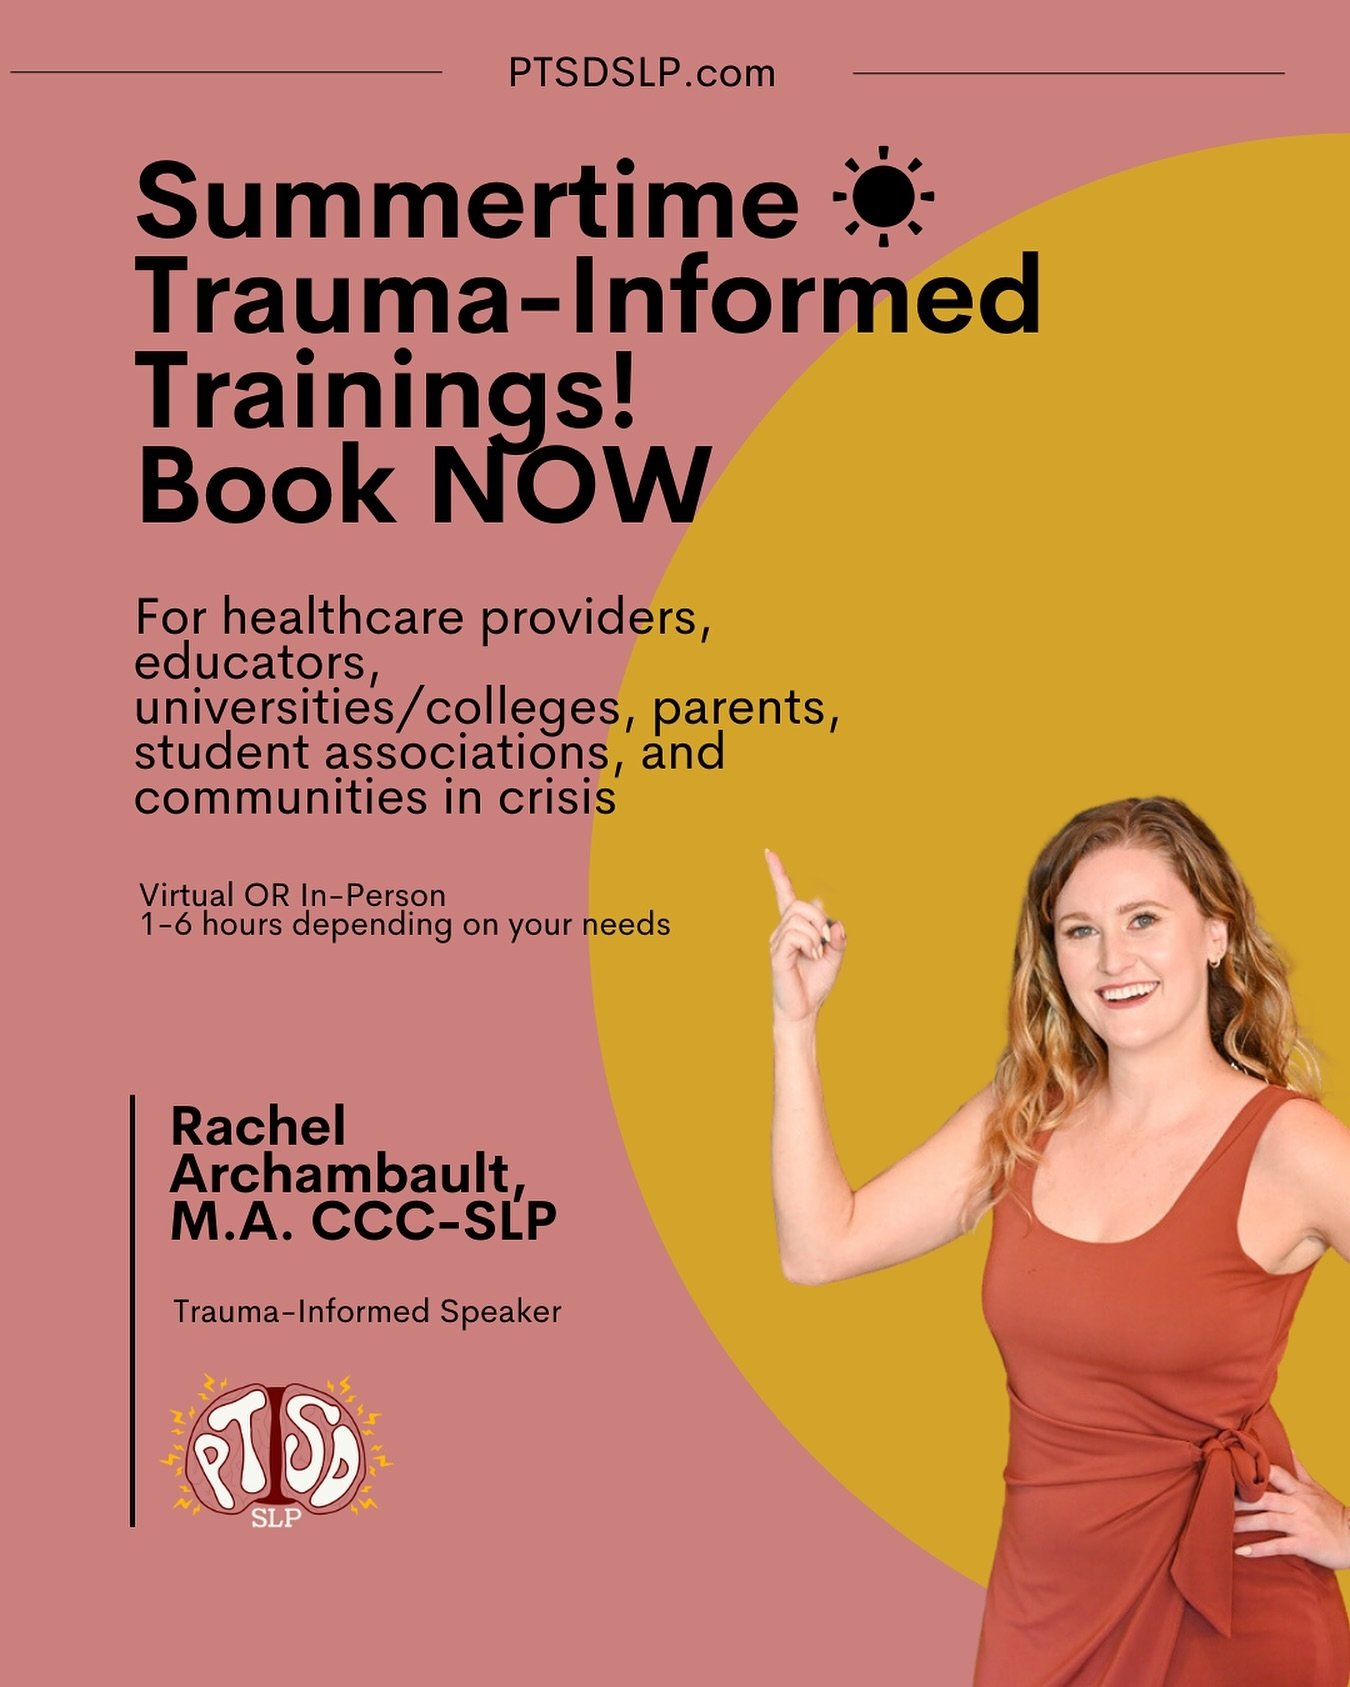 Break out the sunglasses! It&rsquo;s time to get trained to use a trauma-informed lens 😎 Get it??

☀️June, July, and August are open for you to schedule a virtual (or in-person) training from me, wherever you are! If you work with humans, you need t